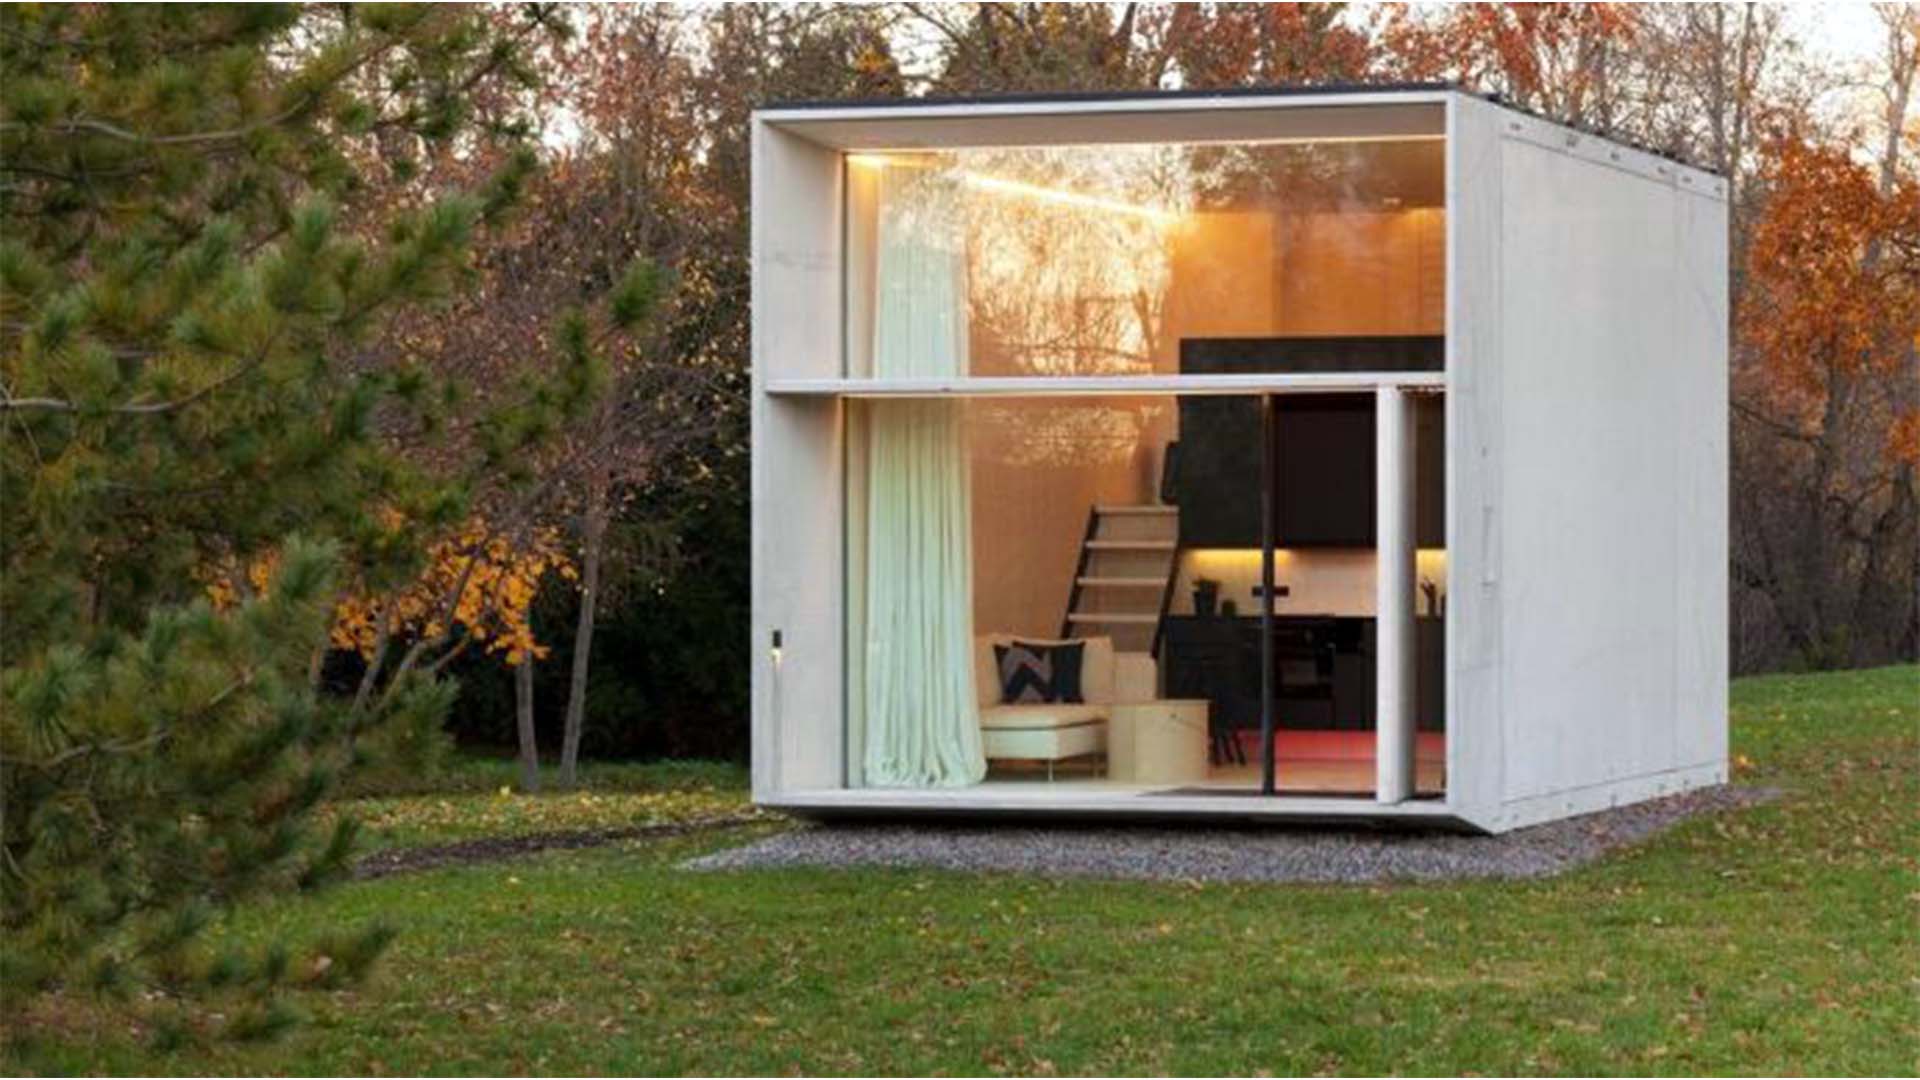 Prefabricated houses from as little as €70,000